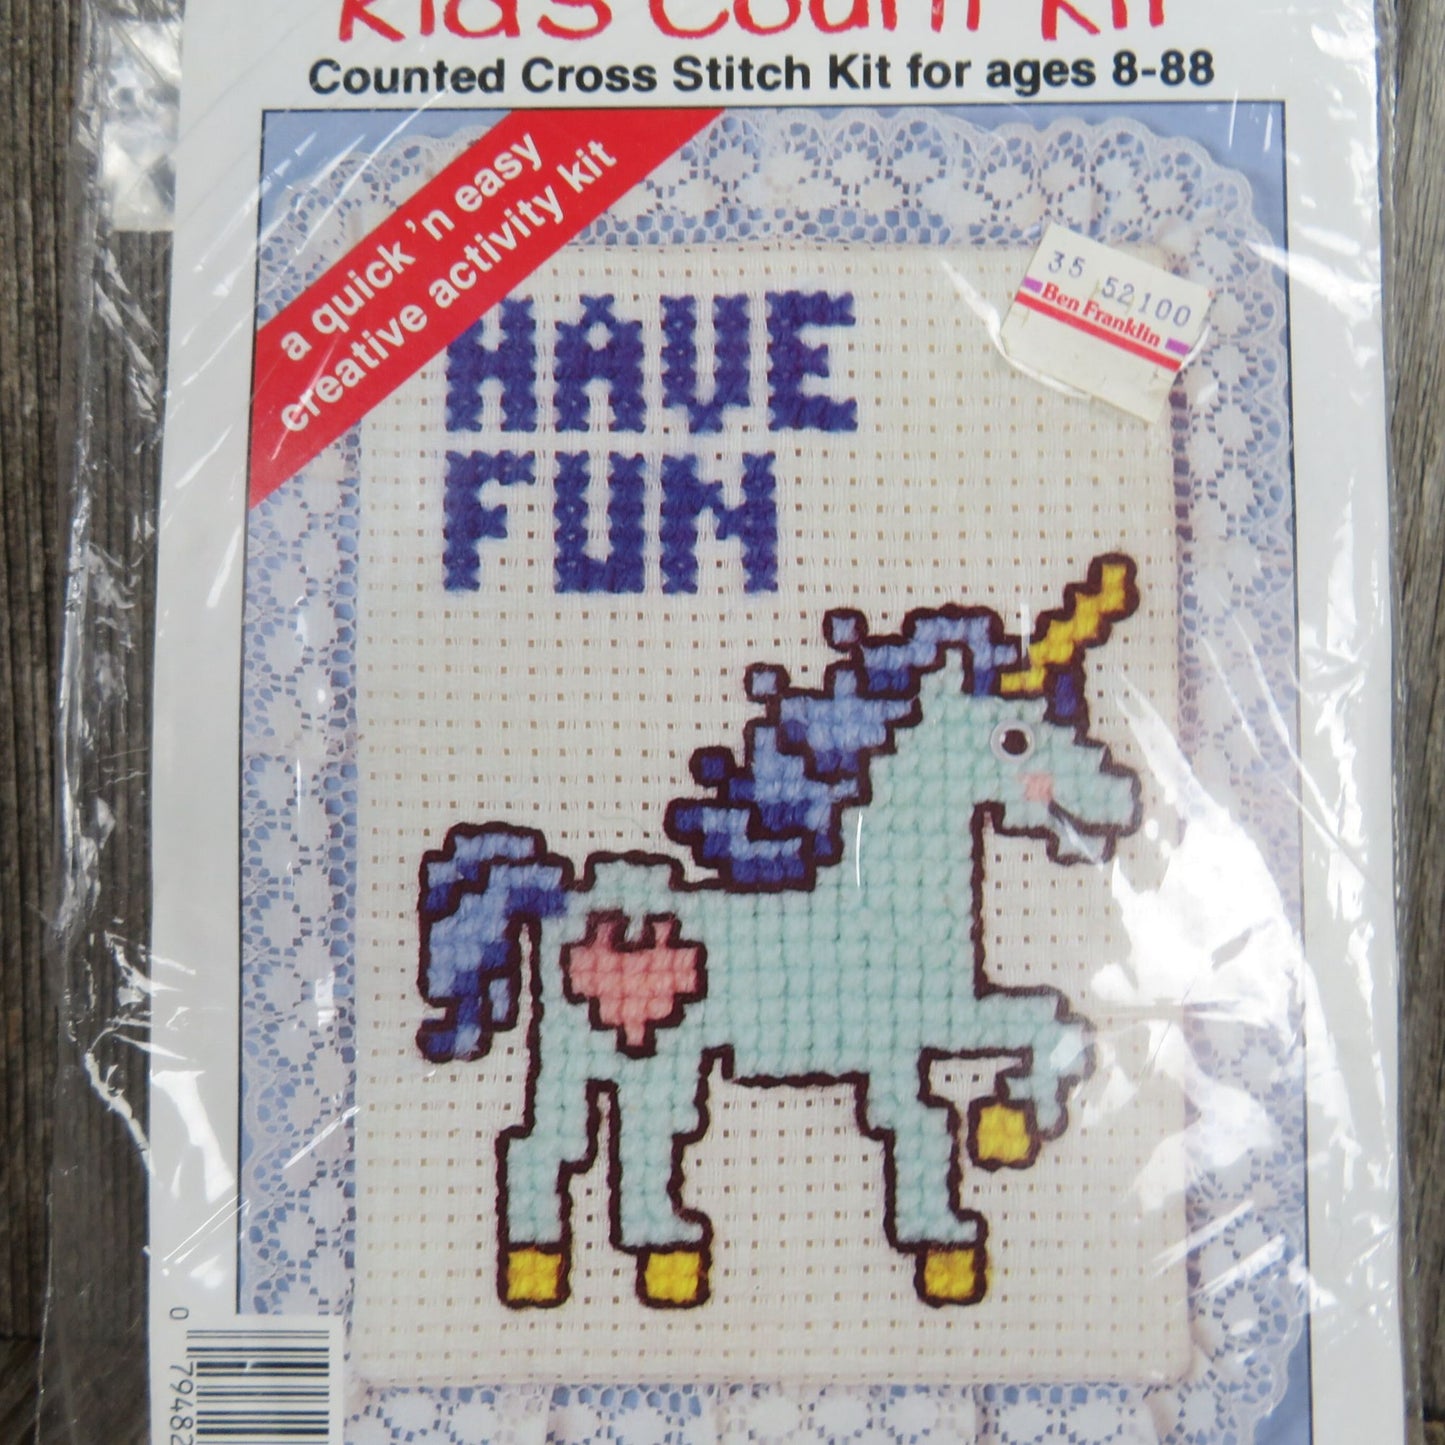 Unicorn Counted Cross Stitch Kit Kid's Count Kit Quick and Easy California Country 6 count